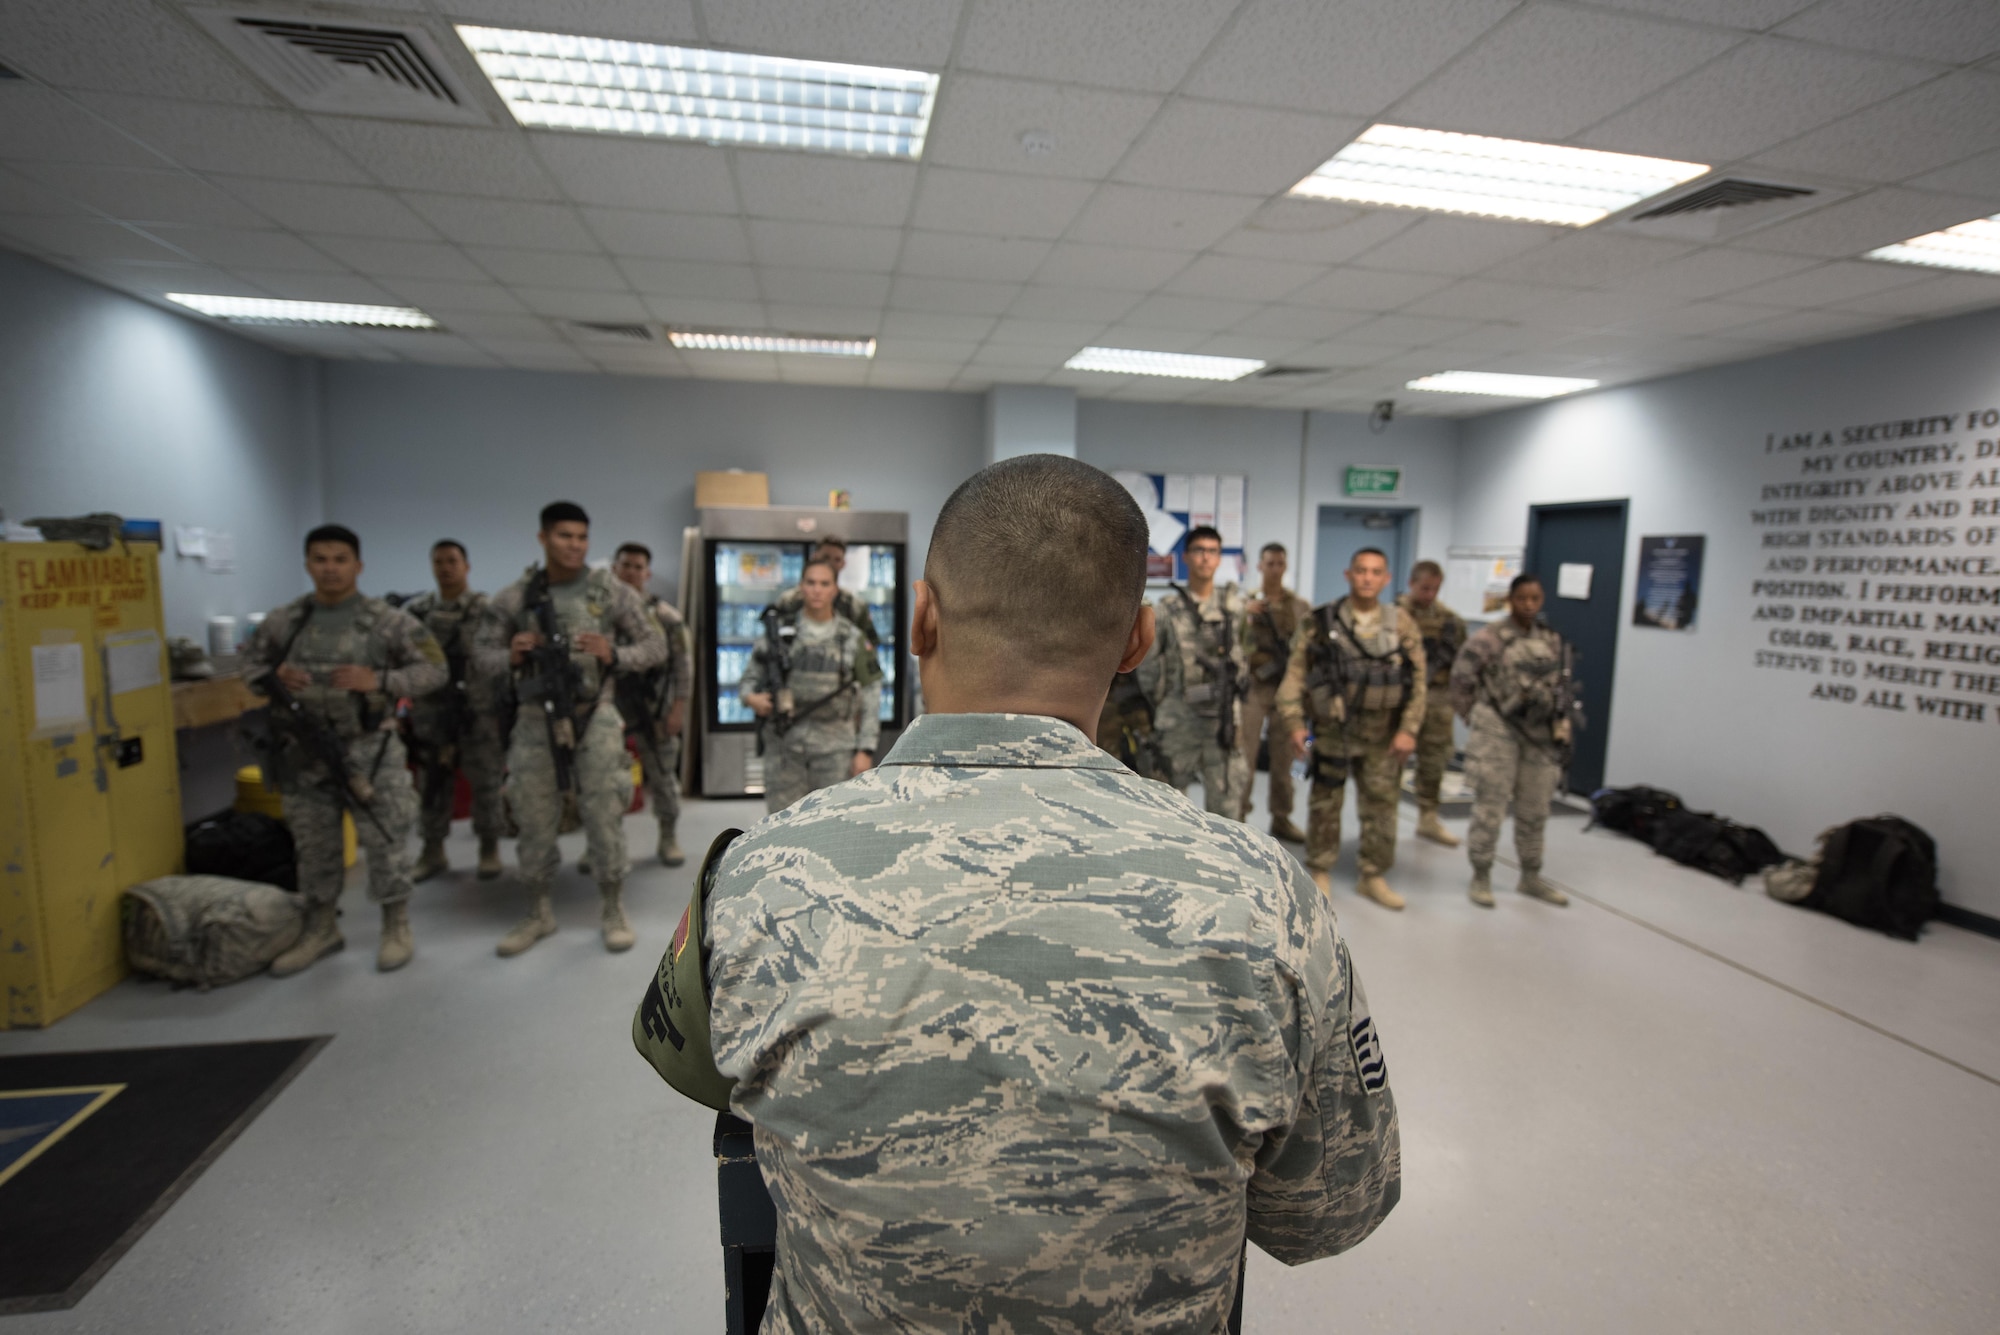 U.S. Air National Guard U.S. Air Force Master Sgt. Oscar Espinosa, 407th Expeditionary Security Forces flight chief, gives instructions to Airmen and U.S. Marines during a guardmount briefing May 10, 2017, in Southwest Asia. Espinosa, a guardsman with the 254th Security Forces Squadron from Andersen Air Force Base, deployed in support of Operation Inherent Resolve. As flight chief, Espinosa coordinates gate guard and patrol teams from both services and international coalition members. (U.S. Air Force photo by Staff Sgt. Alexander W. Riedel)